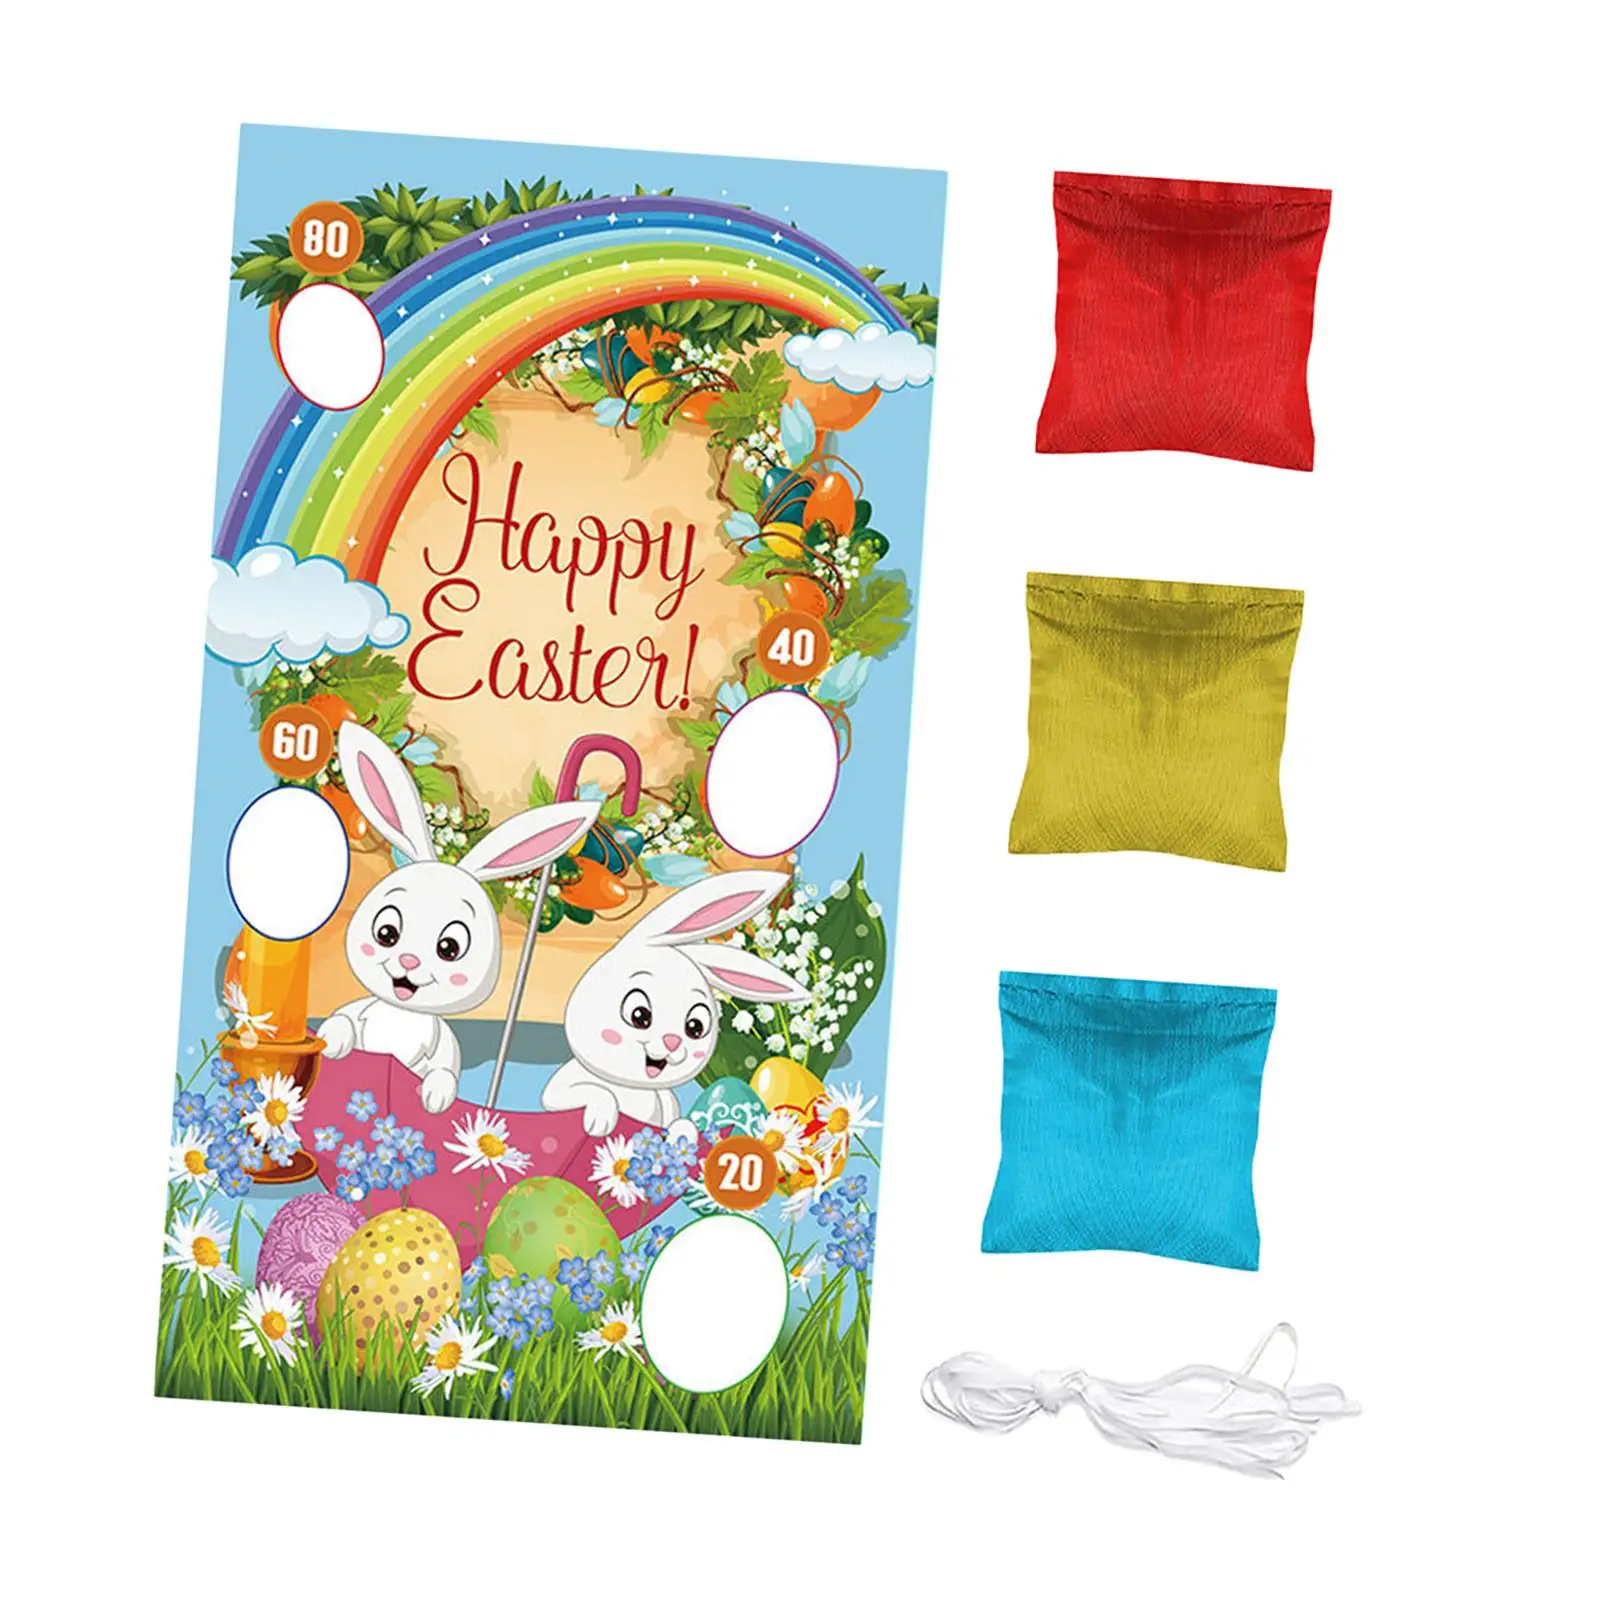 Toss Game Banner Party Decoration with 3 Bean Bags for Family Gathering Easter Decor Reusable Indoor and Outdoor Outside Toys